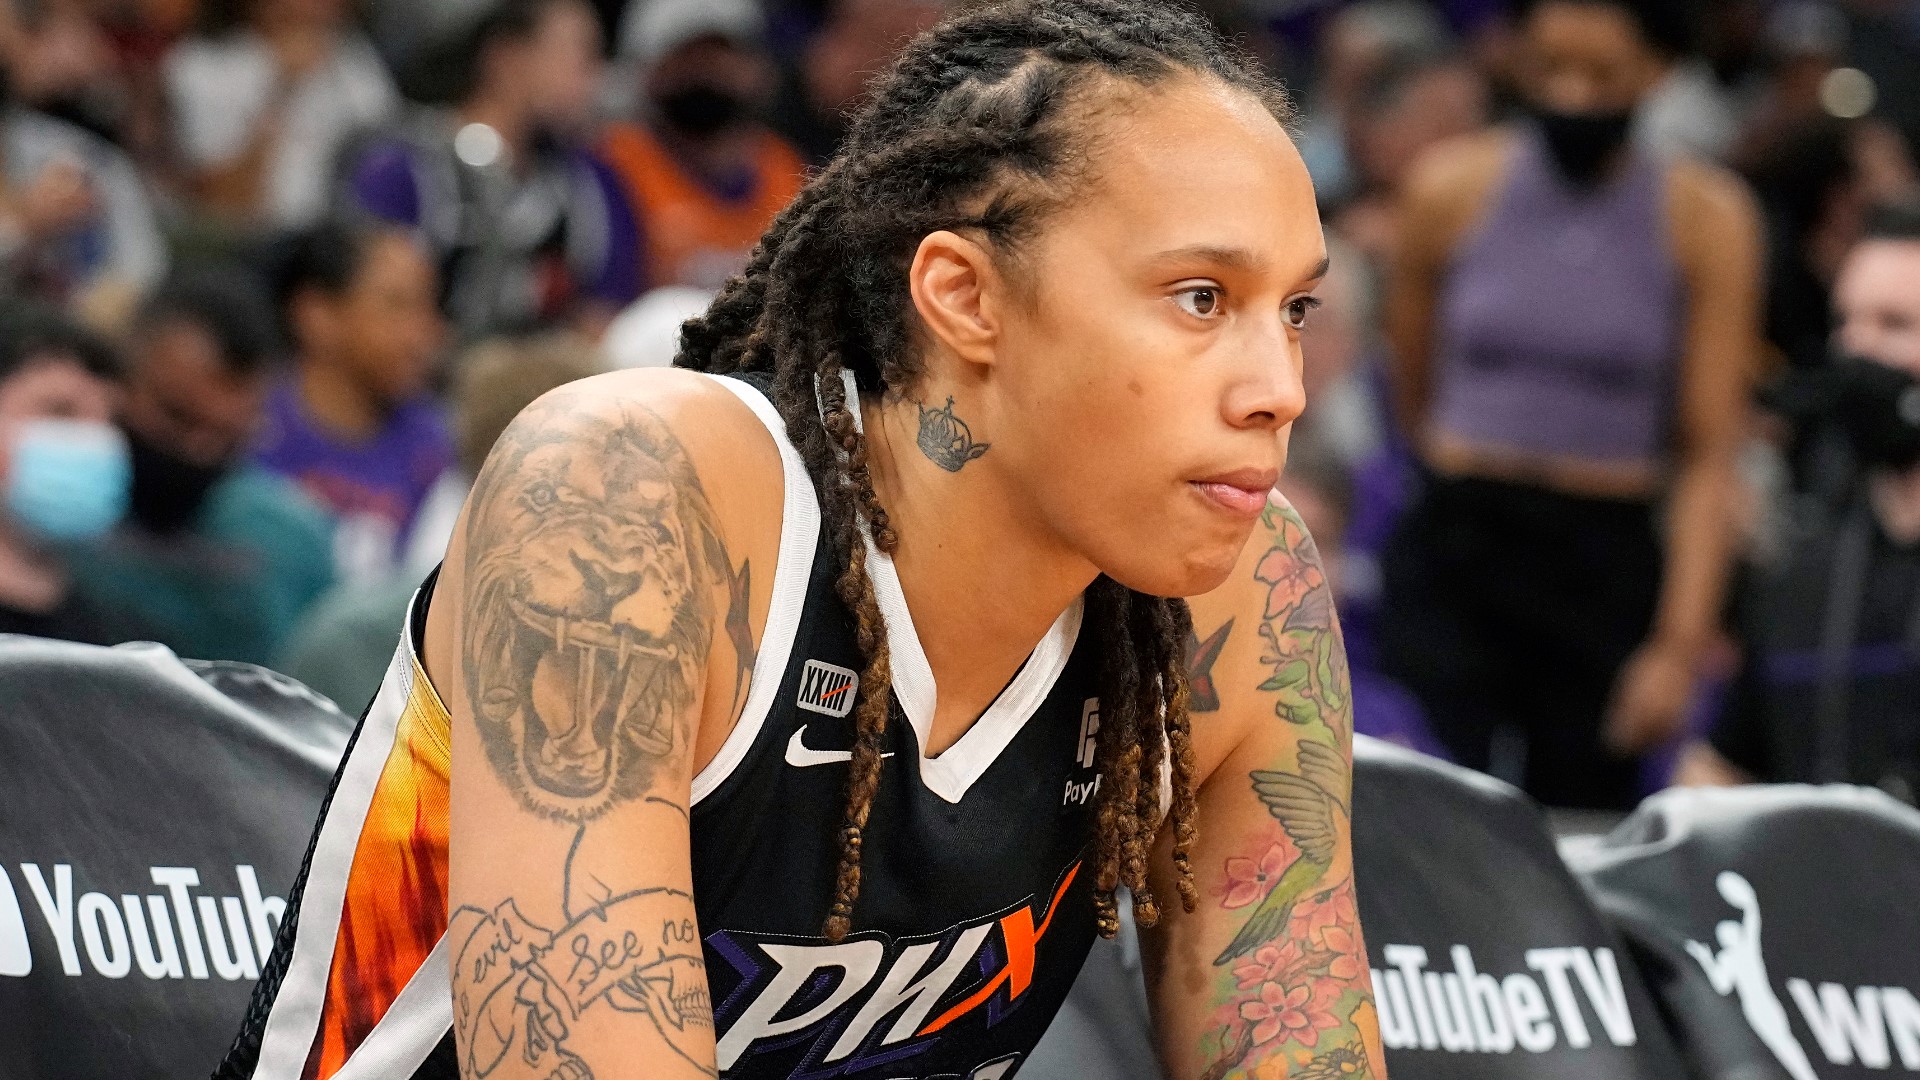 "I’m terrified I might be here forever,” Griner said in a handwritten letter to Biden that she penned from a Russian prison.